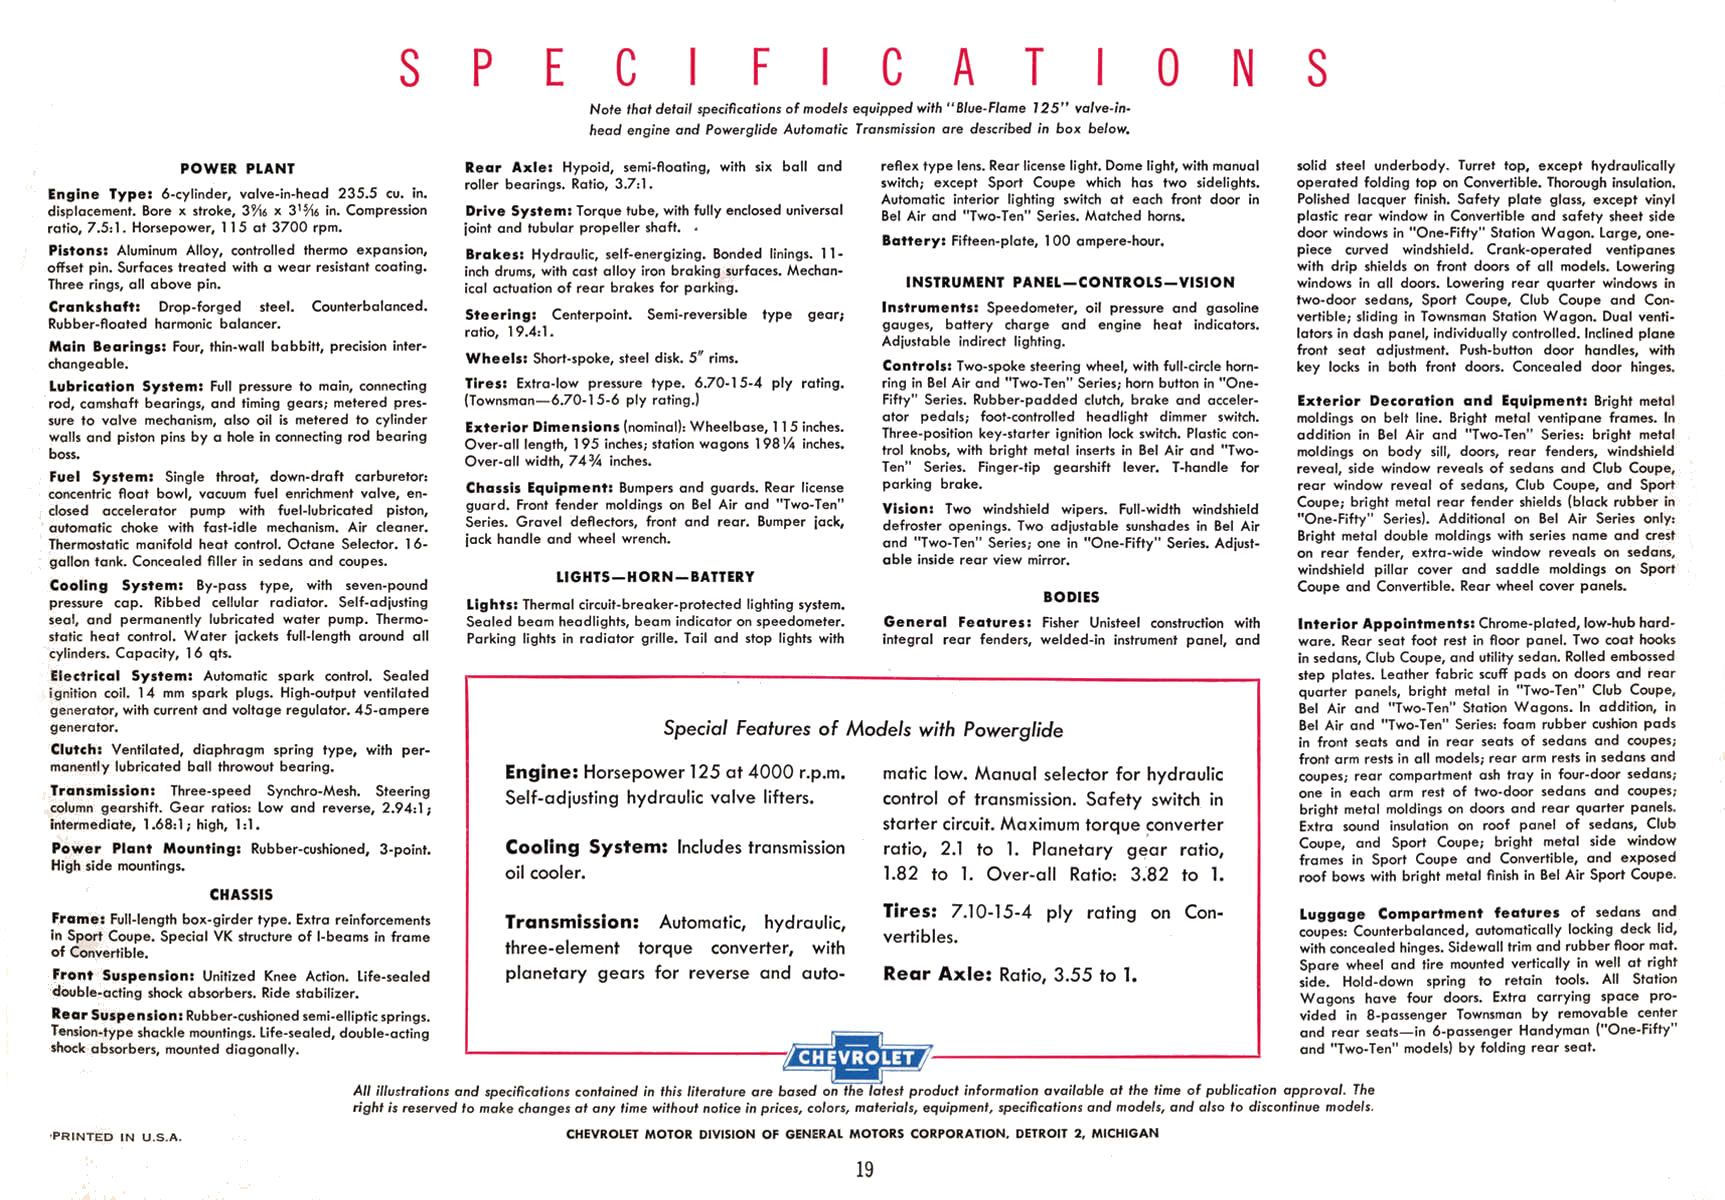 1954 Chevrolet Brochure Page 1